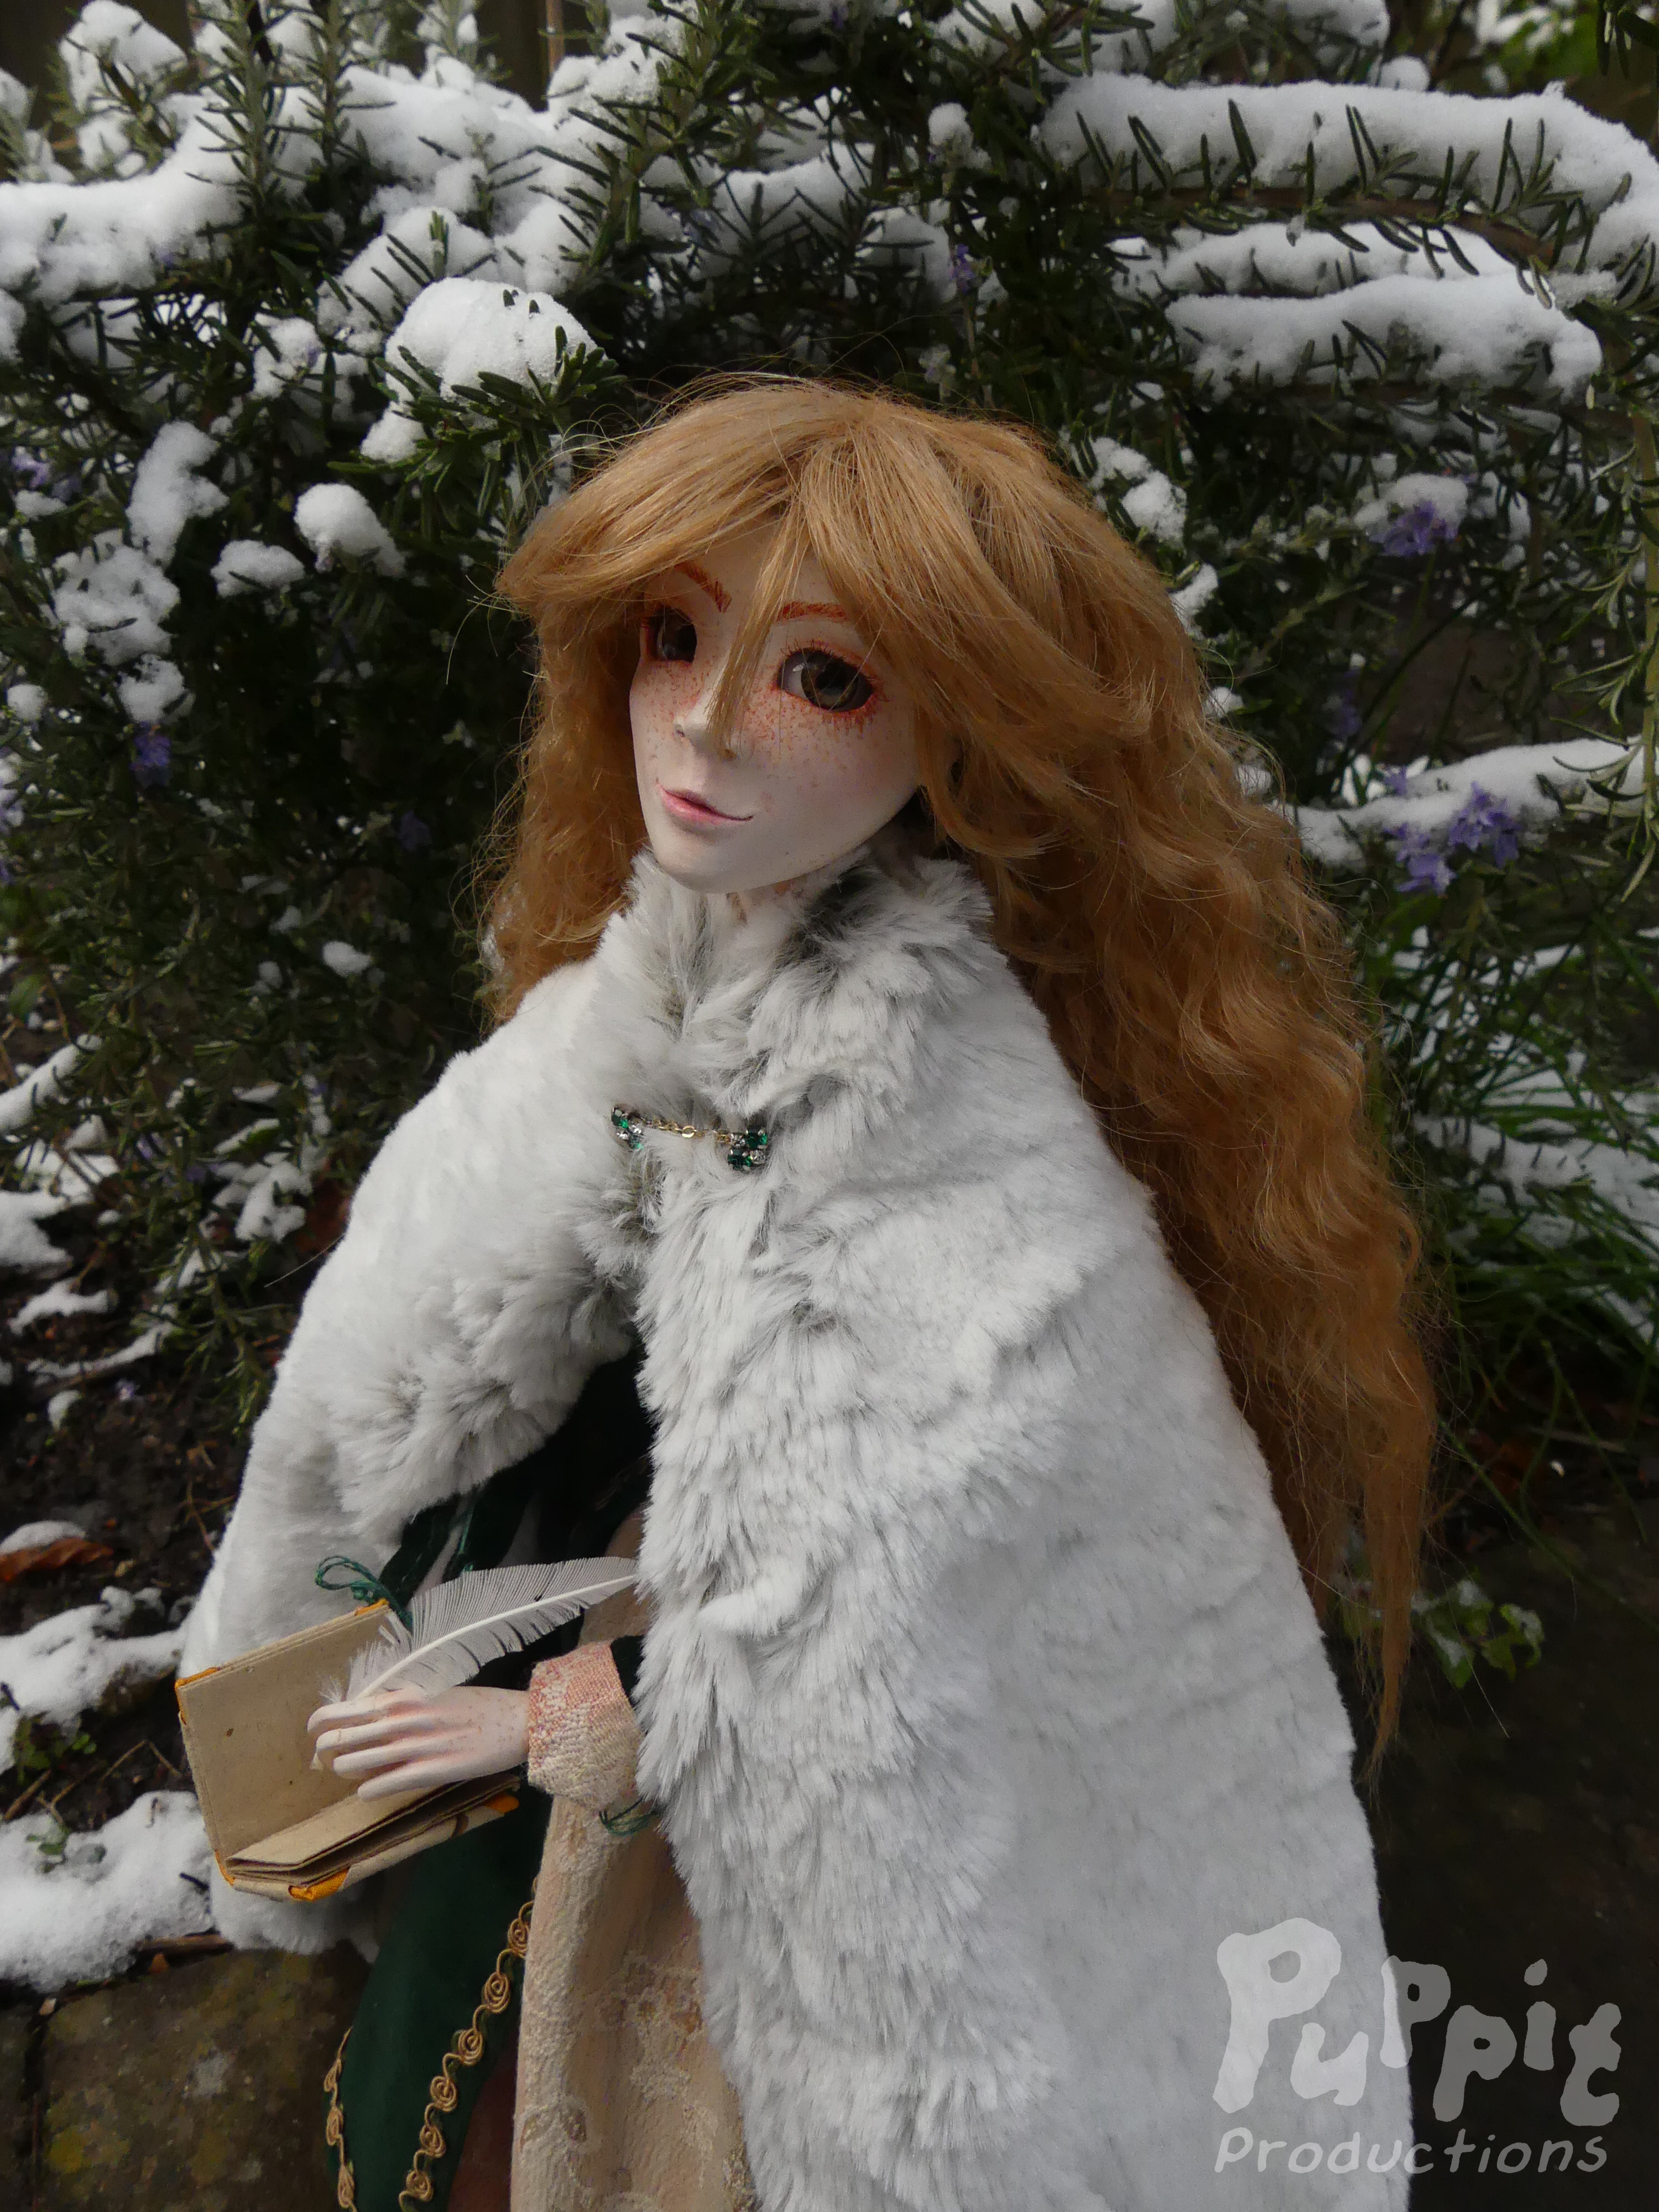  A picture of Ala, a skinny, freckled ball jointed doll with green eyes and long wavy light brown hair, standing in front of a snowy bush, wearing a green Renaissance dress with a white fur cloak. She is holding a notebook and quill and looking at the viewer.